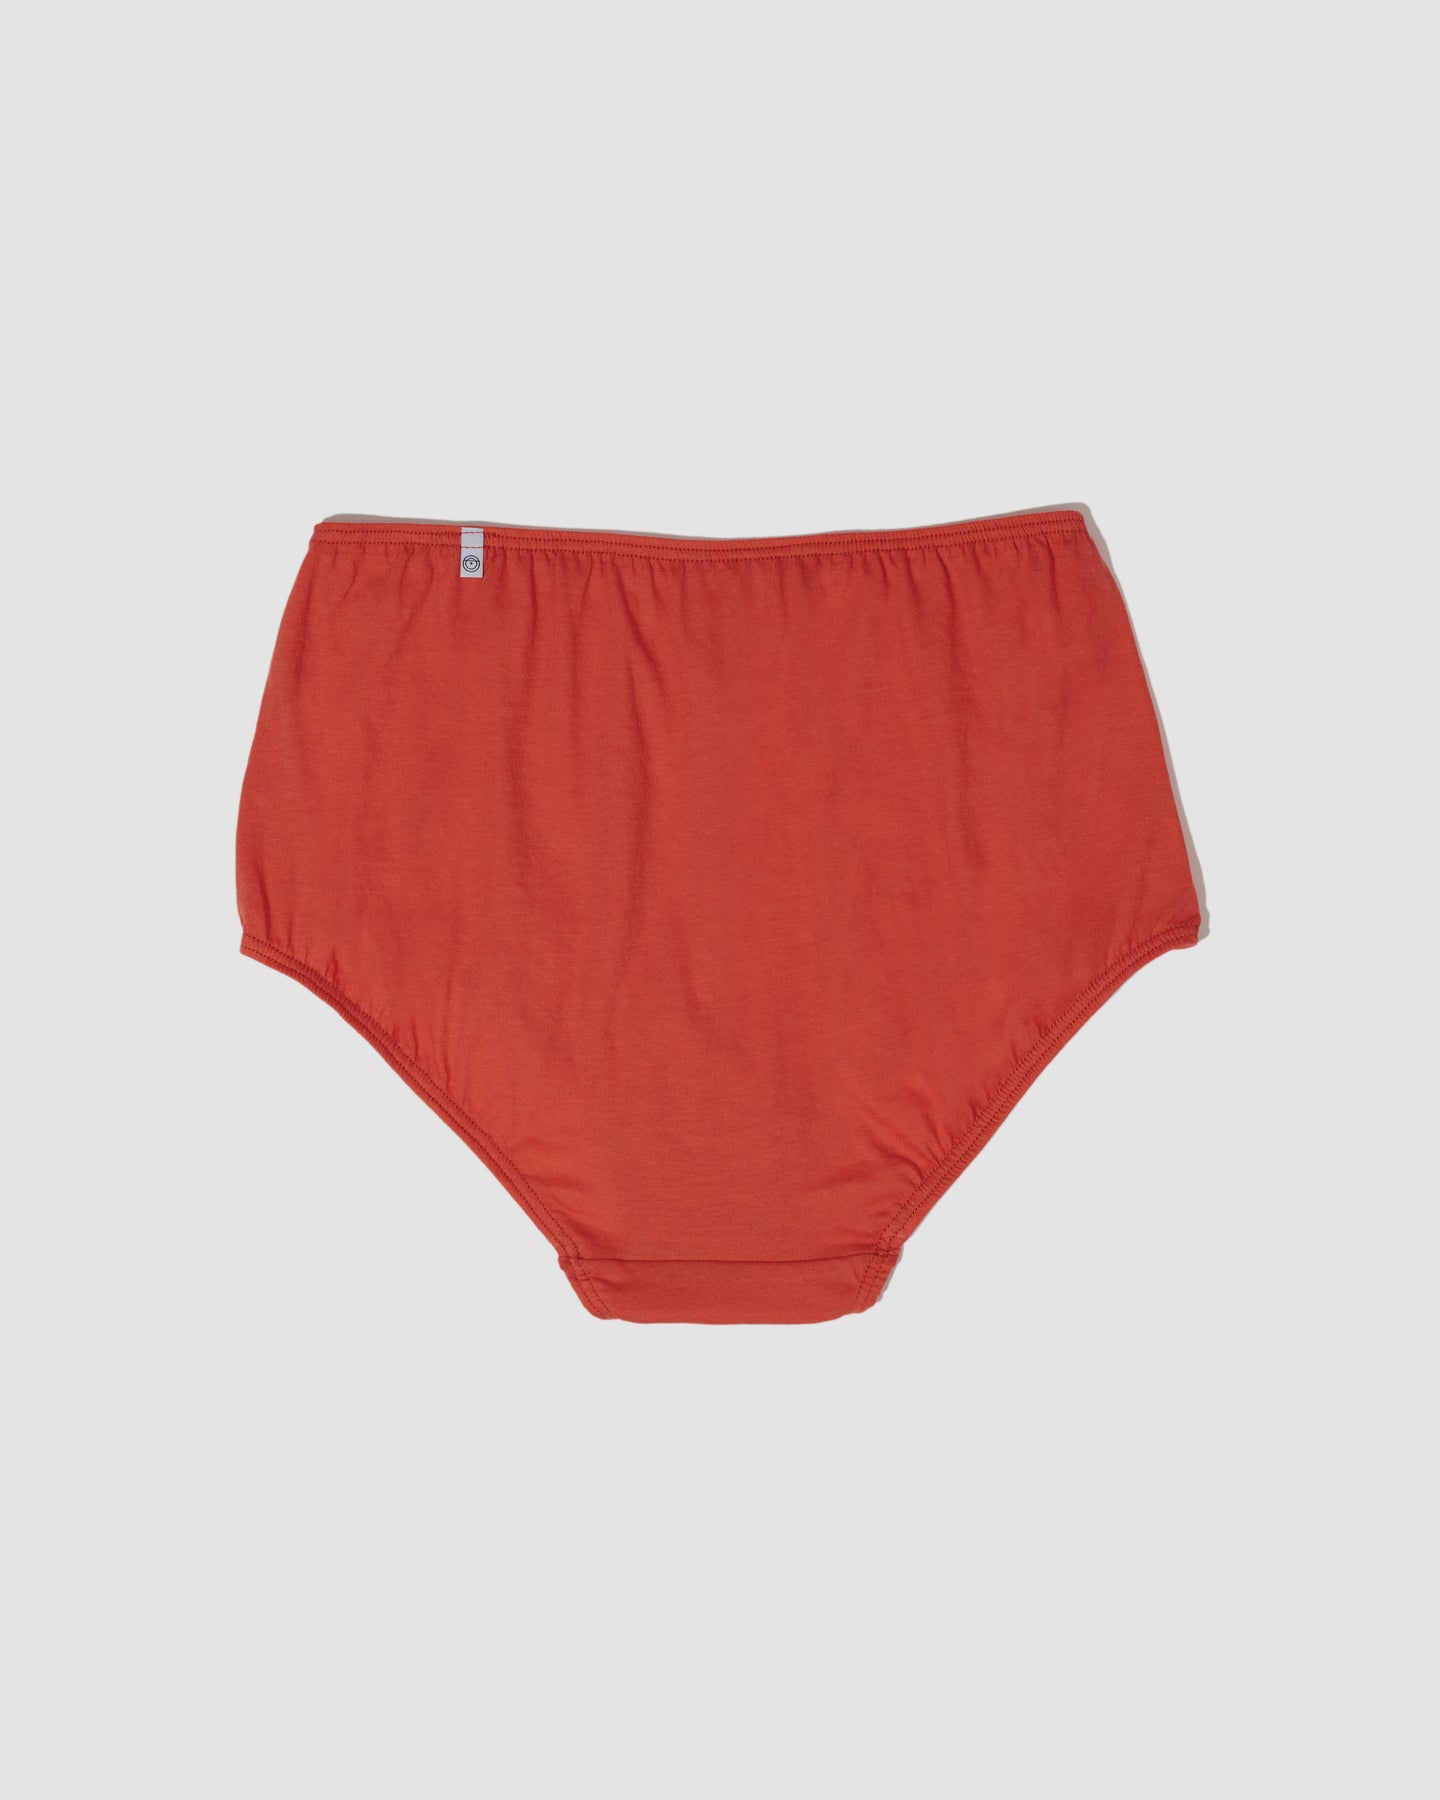 Buy TBOP Women Cotton Underwear-Red(X-Large) at